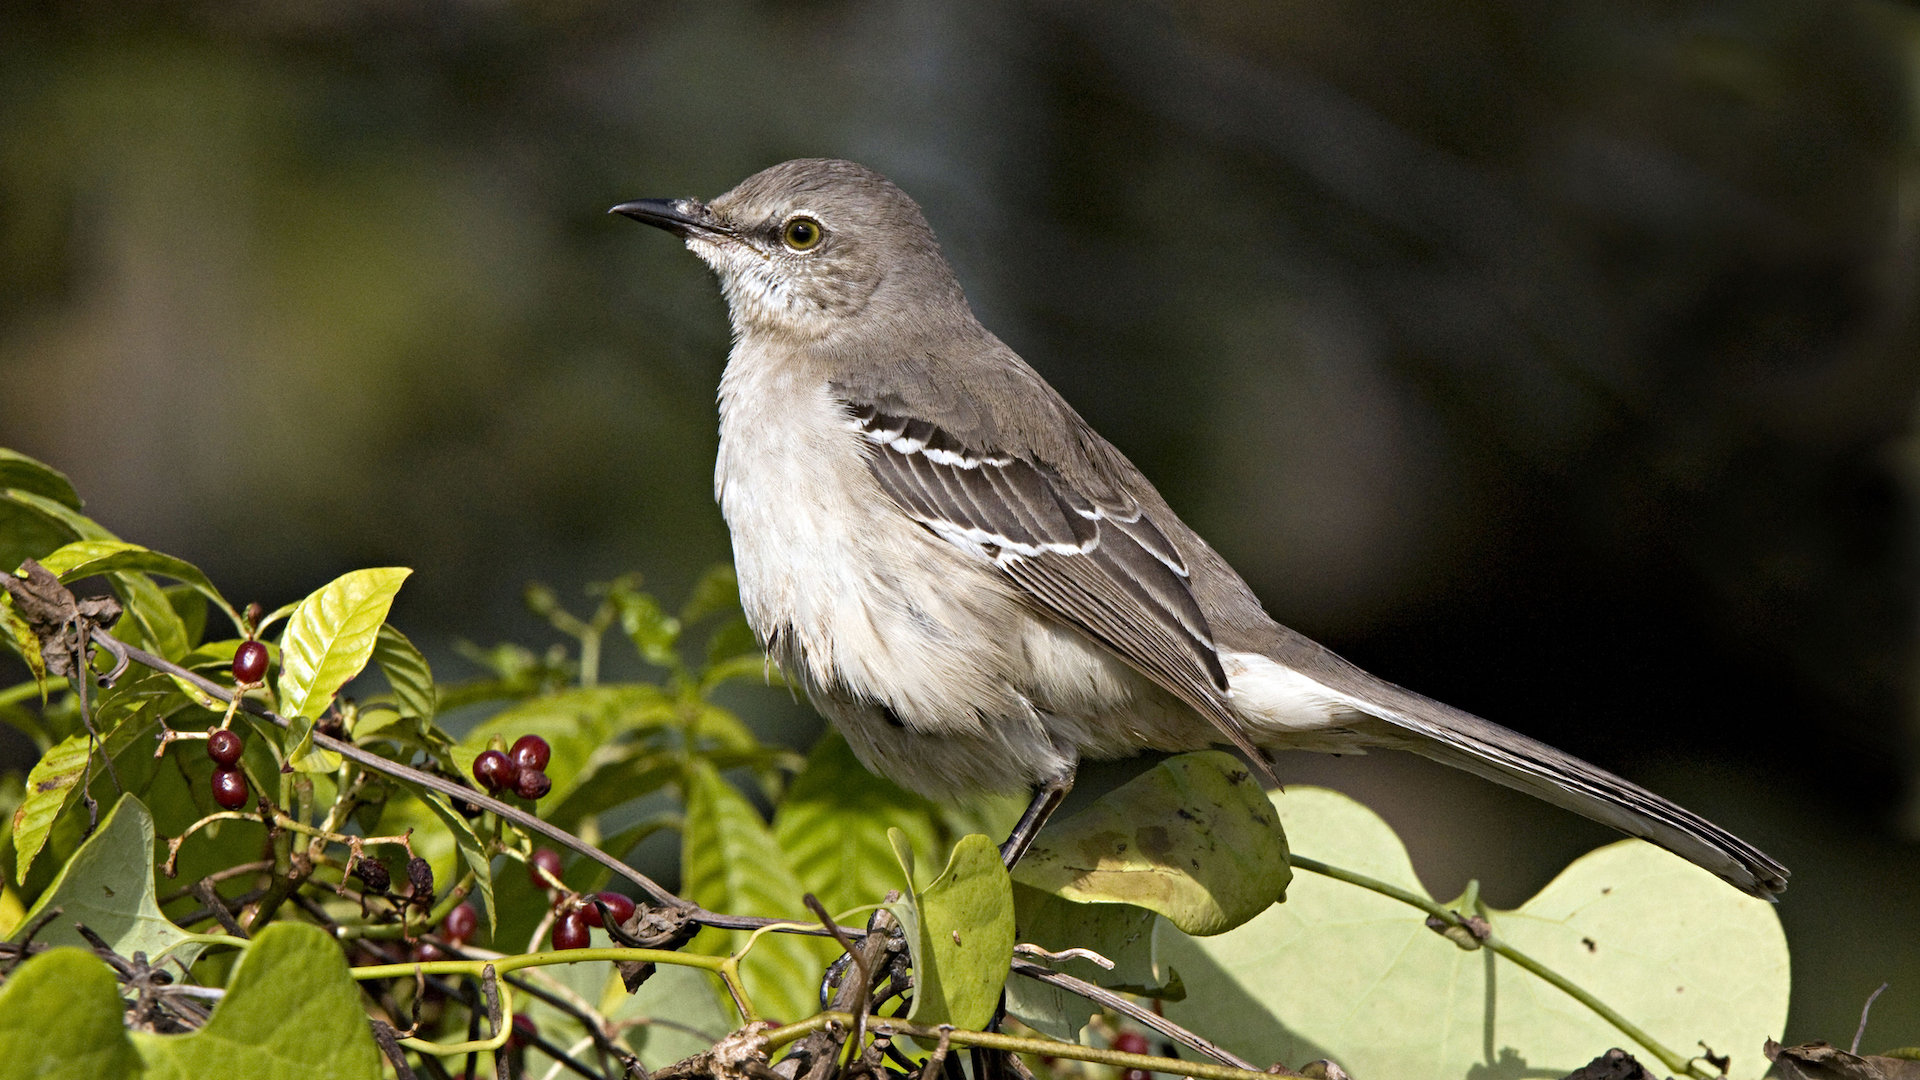 A photo of a juvenile northern mockingbird perched on a leafy branch